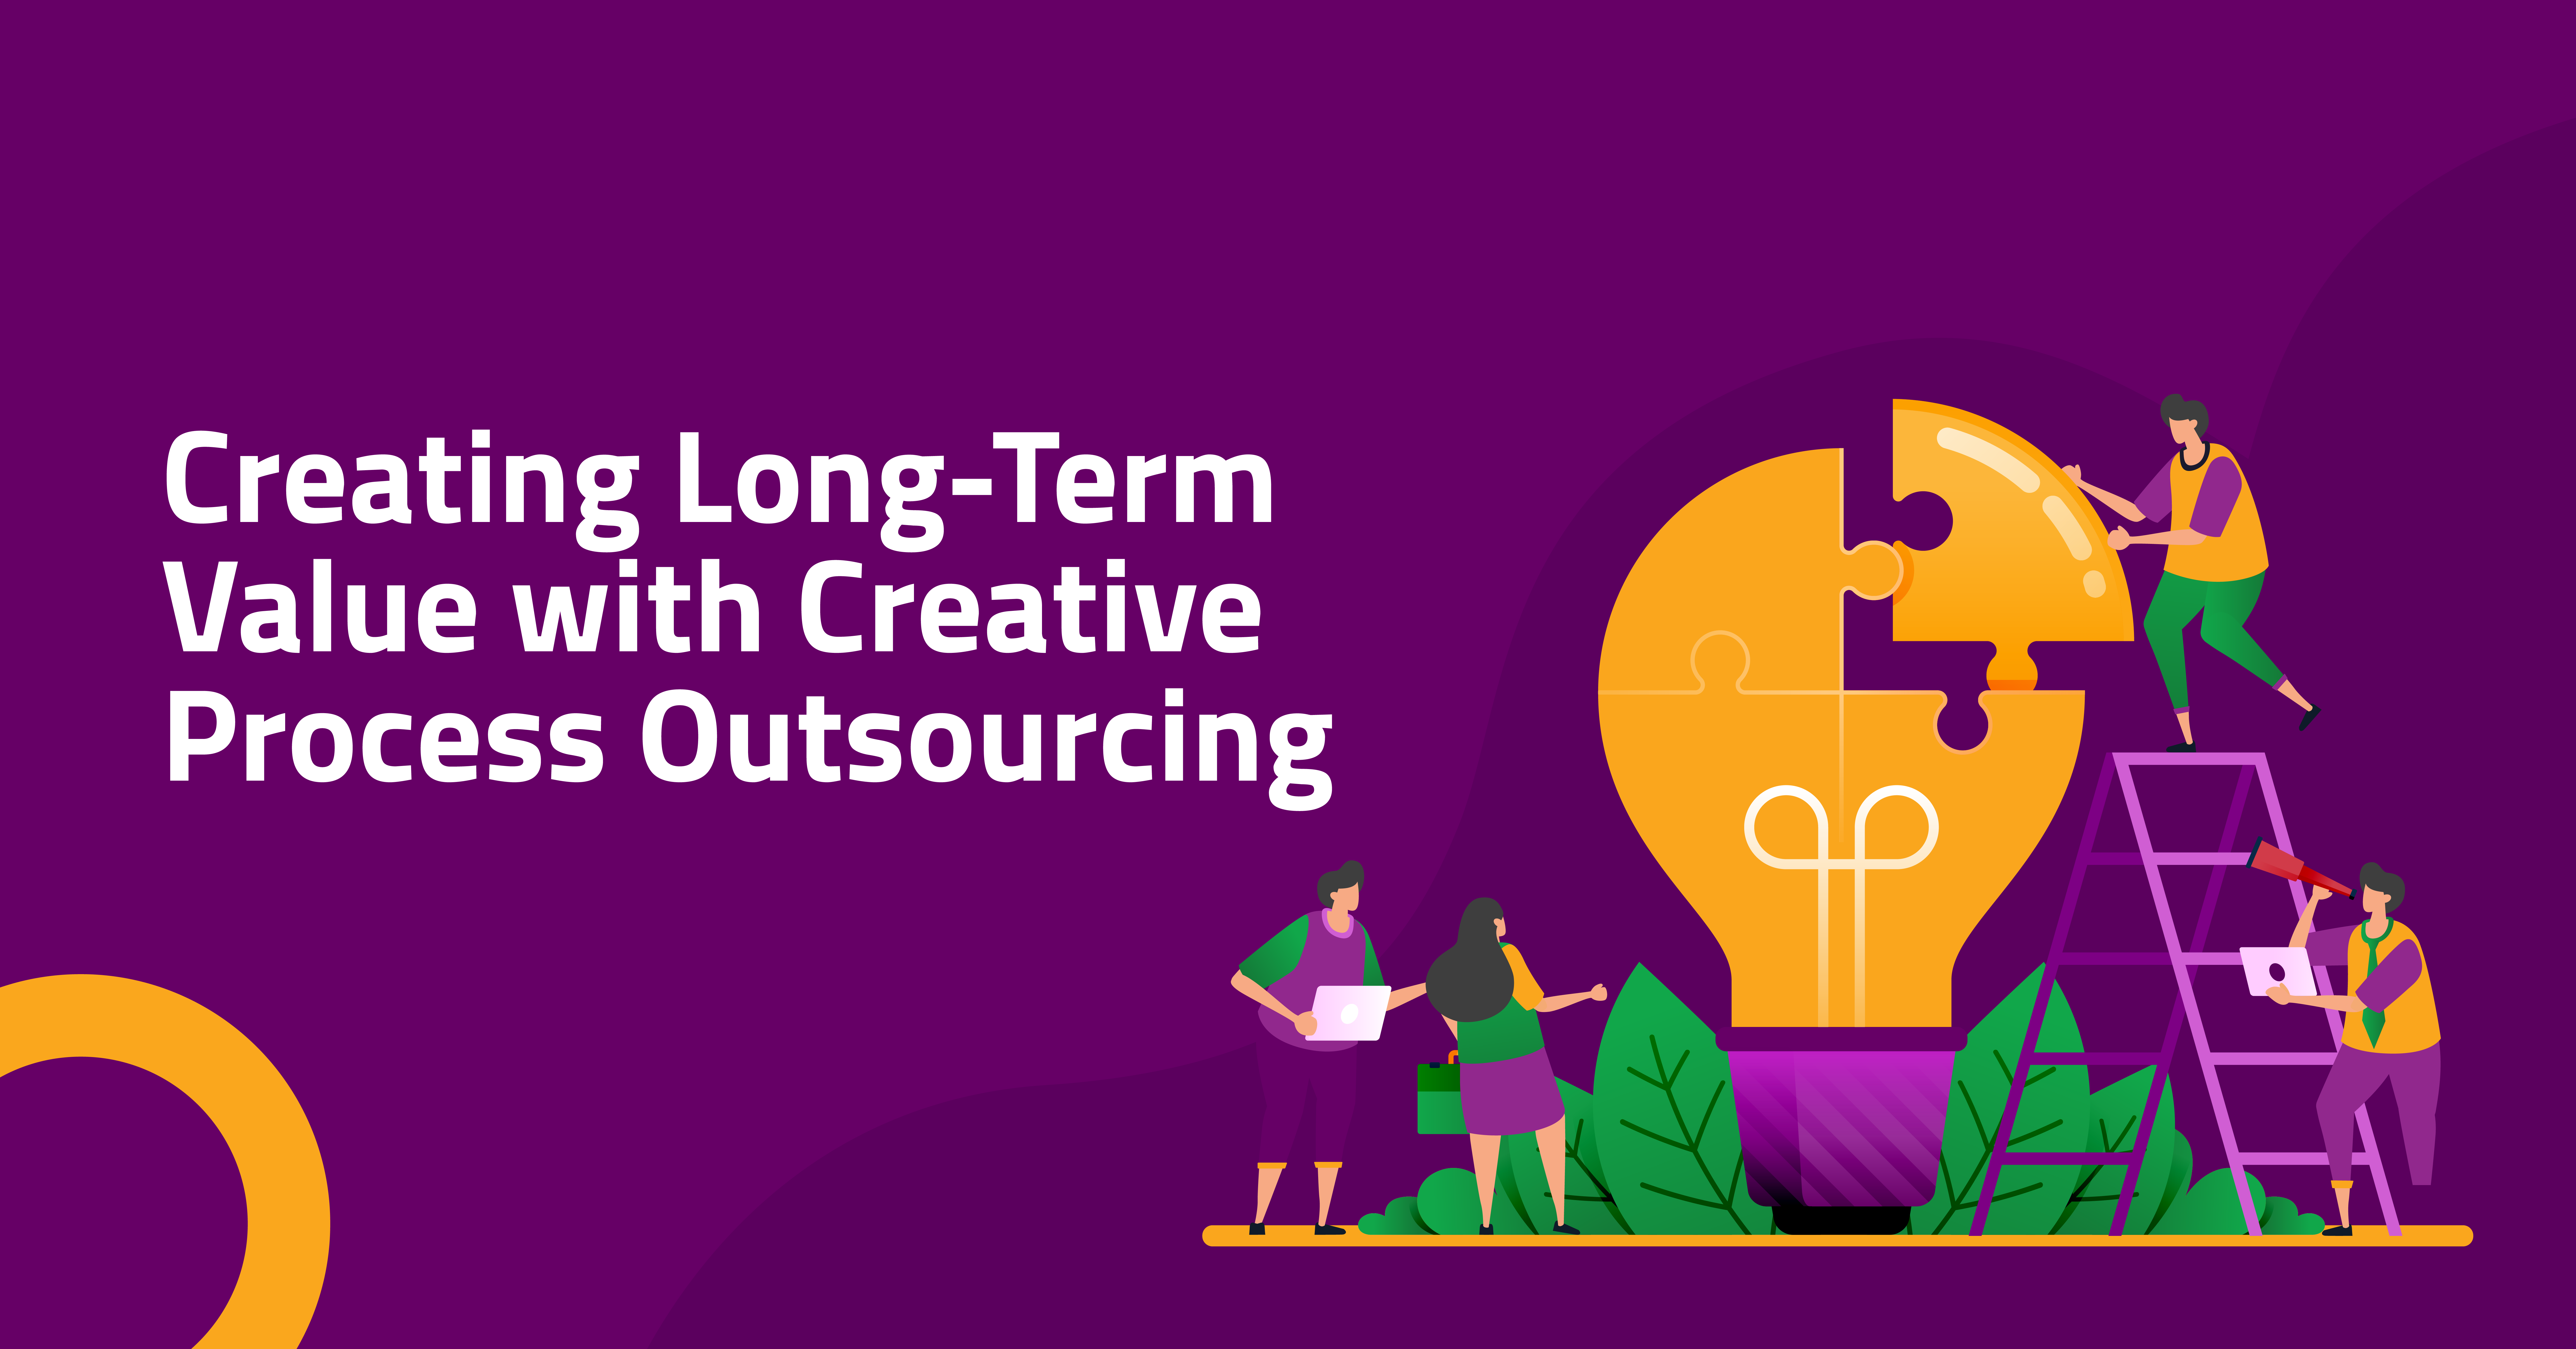 Creating Long-Term Value with Creative Process Outsourcing